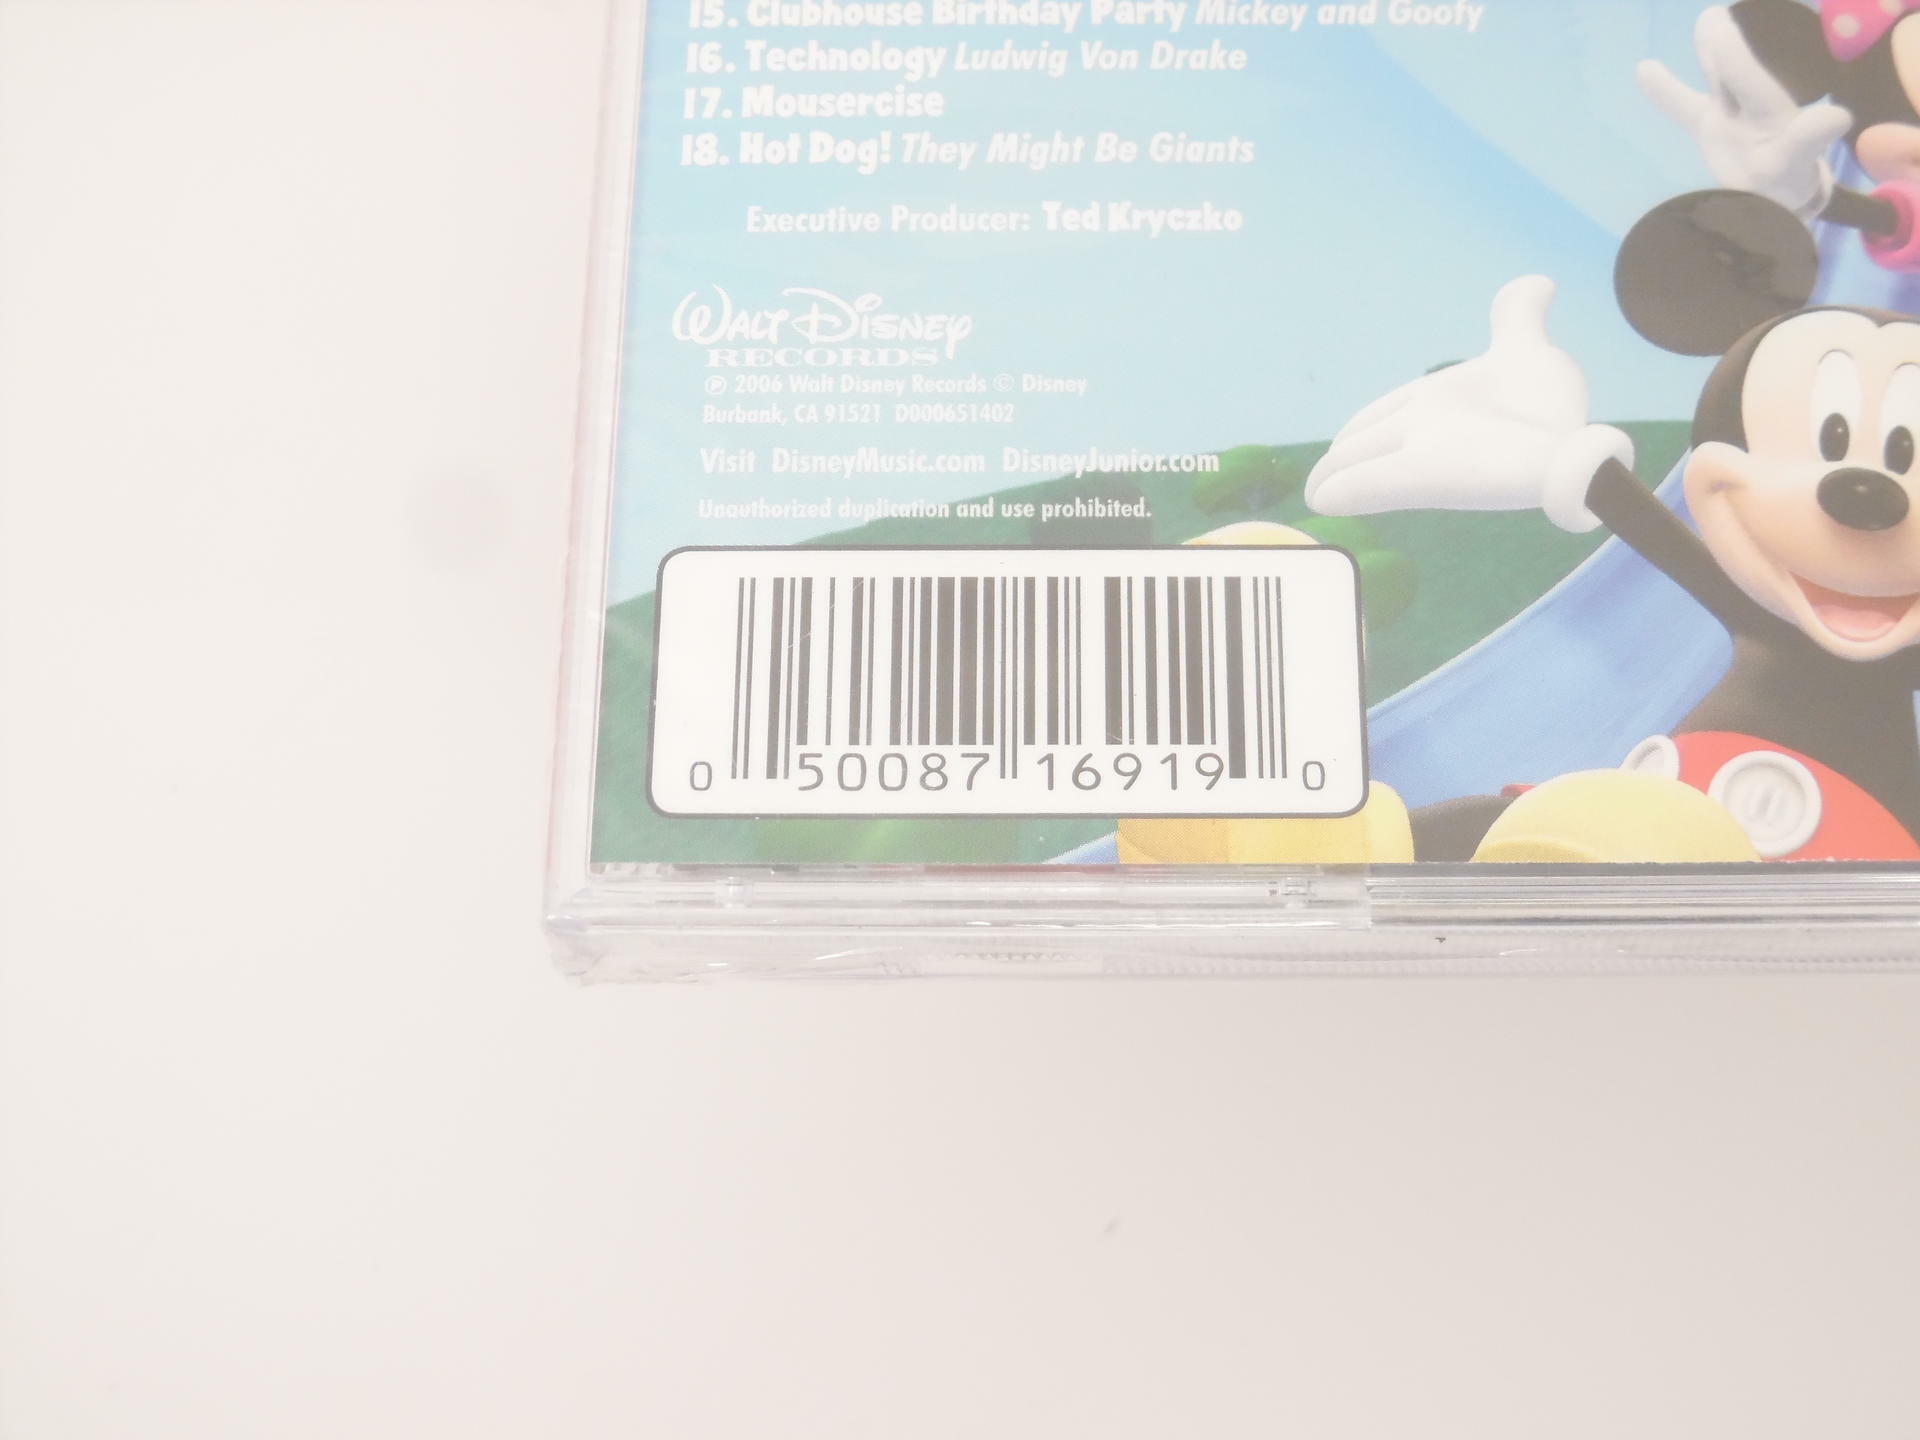 DISNEYS MICKEY MOUSE CLUBHOUSE CD, Songs from show! Brand New! Disney jr,  2006